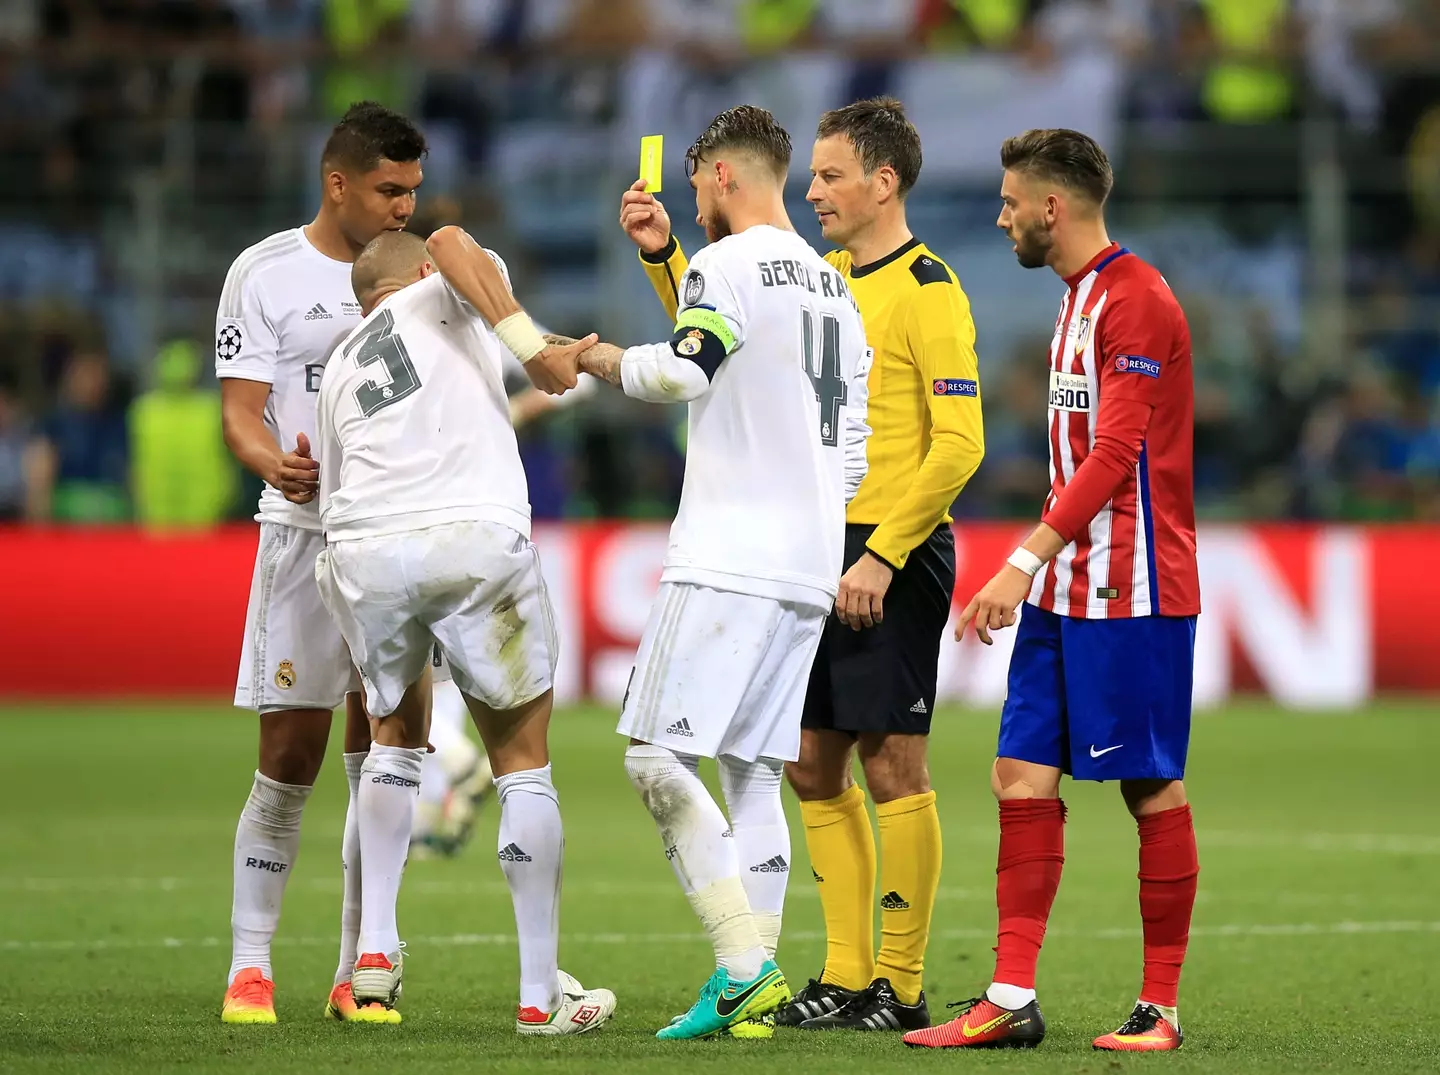 Clattenburg books Pepe during the Champions League final. Image: PA Images